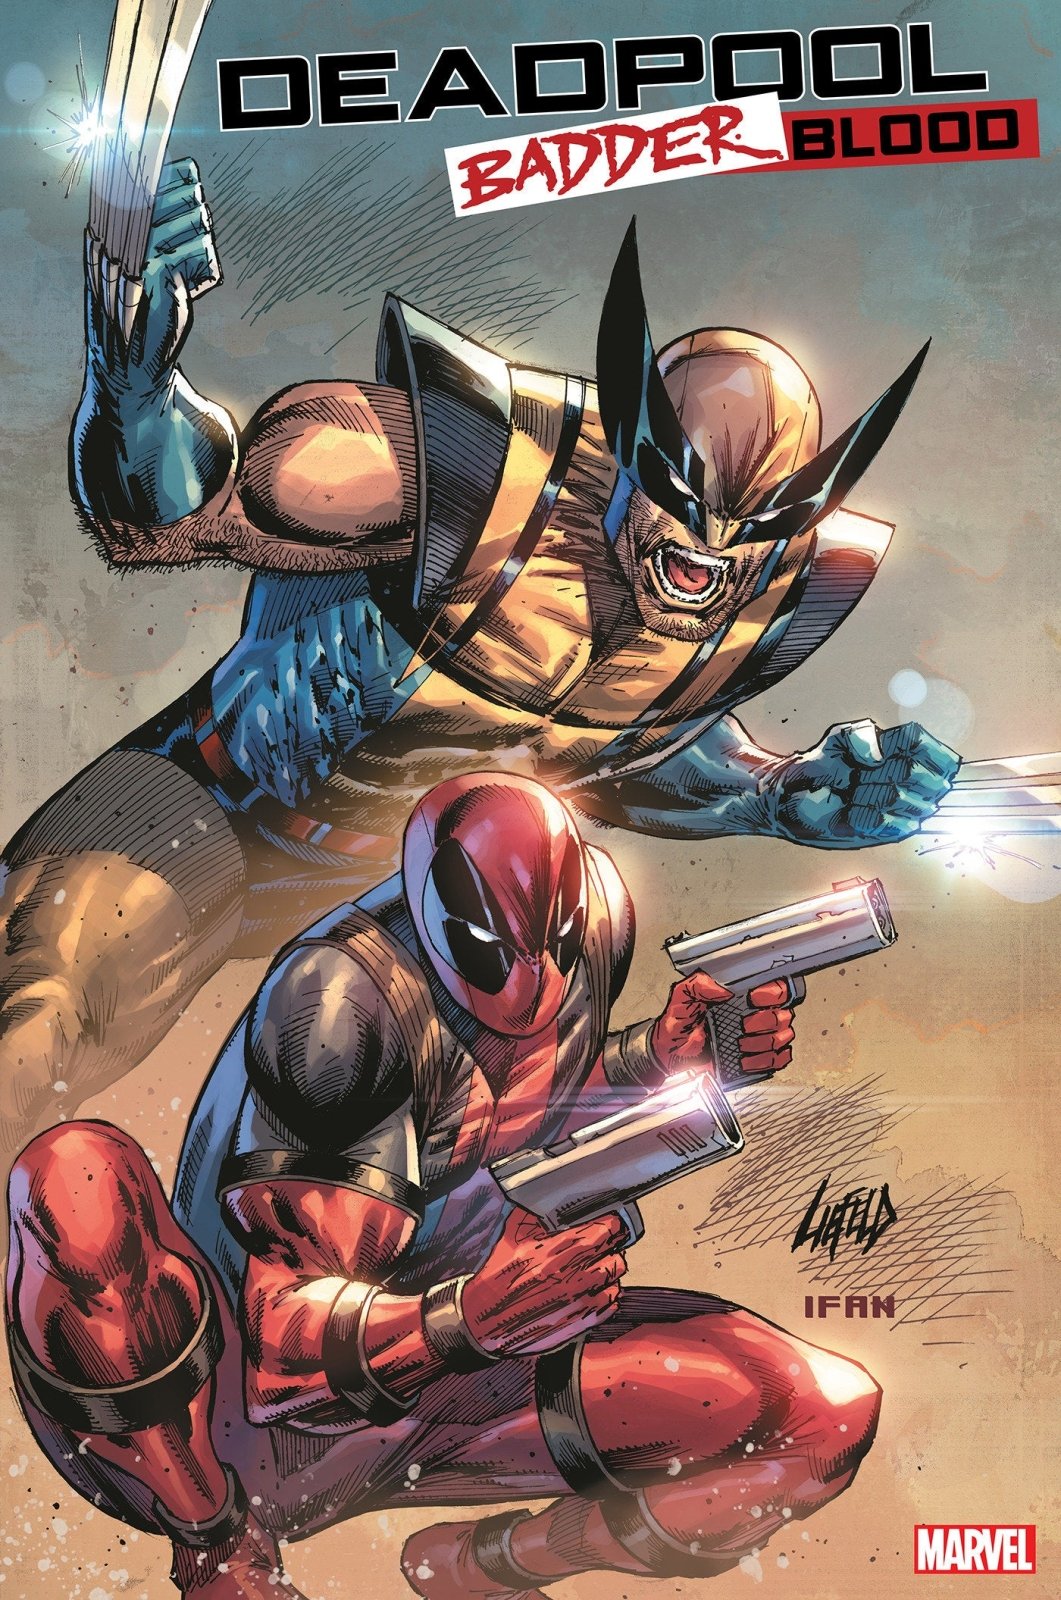 Deadpool: Badder Blood 1 Rob Liefeld Variant - The Fourth Place